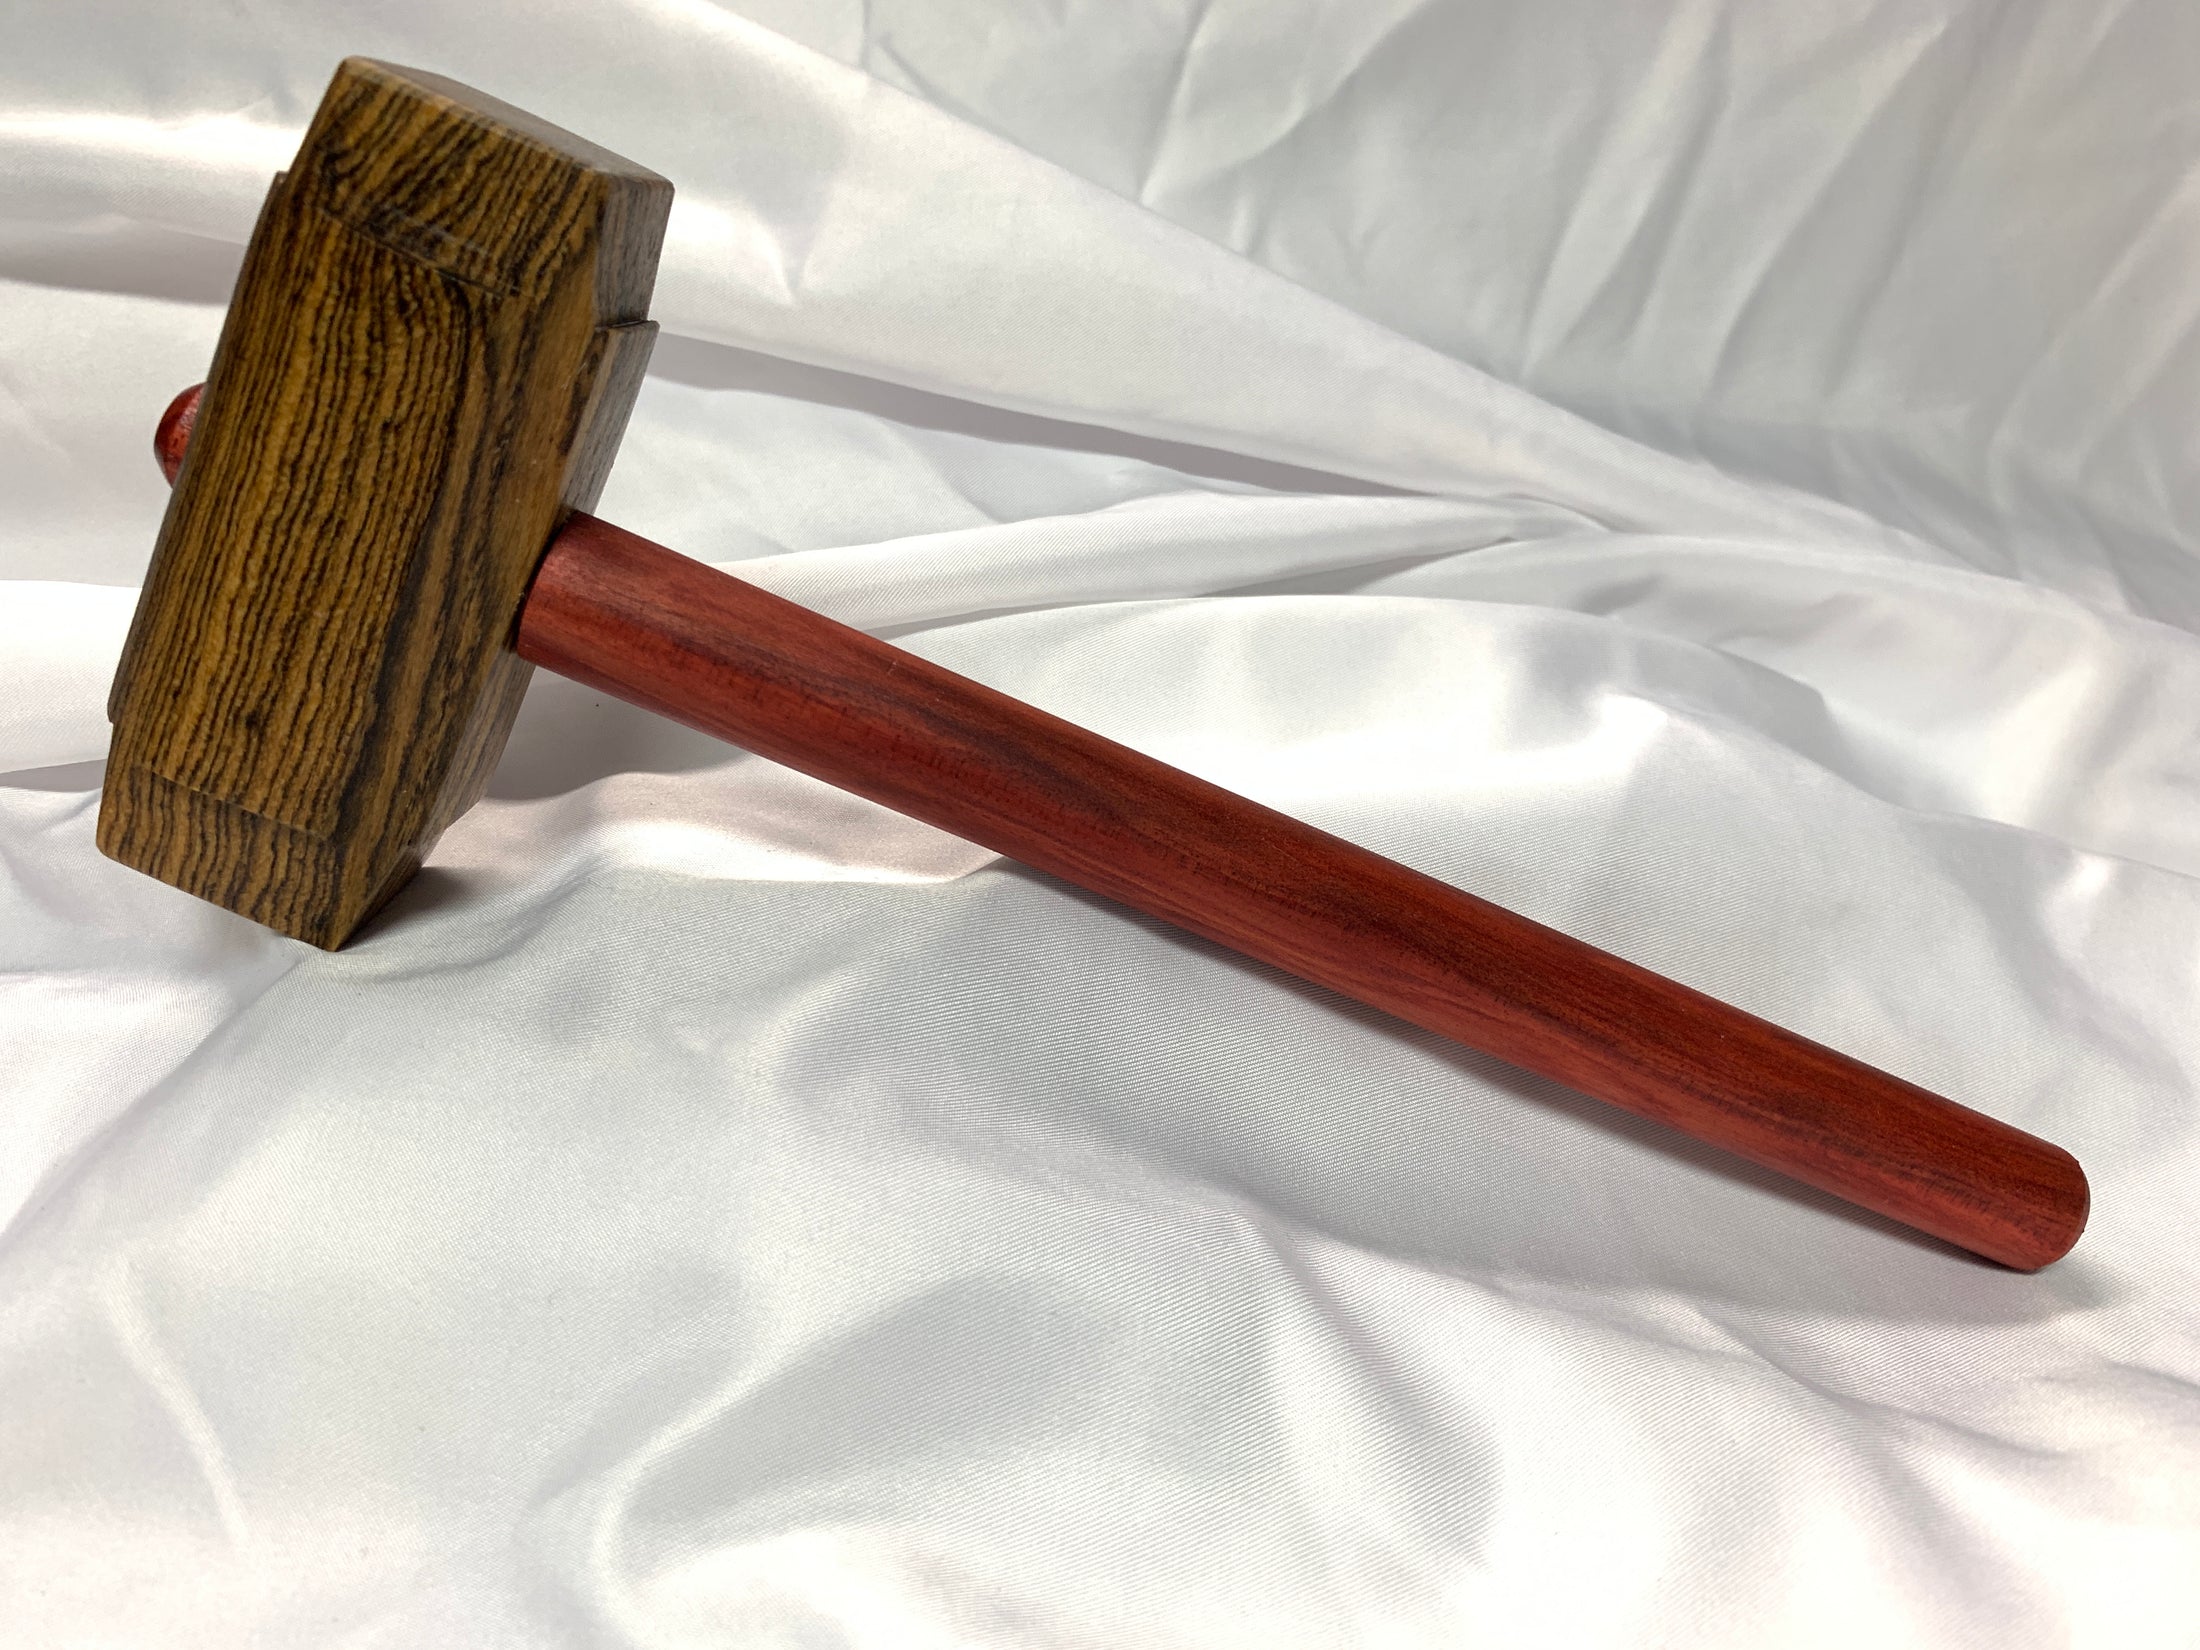 Thors Hammer Woodworking Mallet Bocote Head with Redheart Handle Kings Fine Woodworking